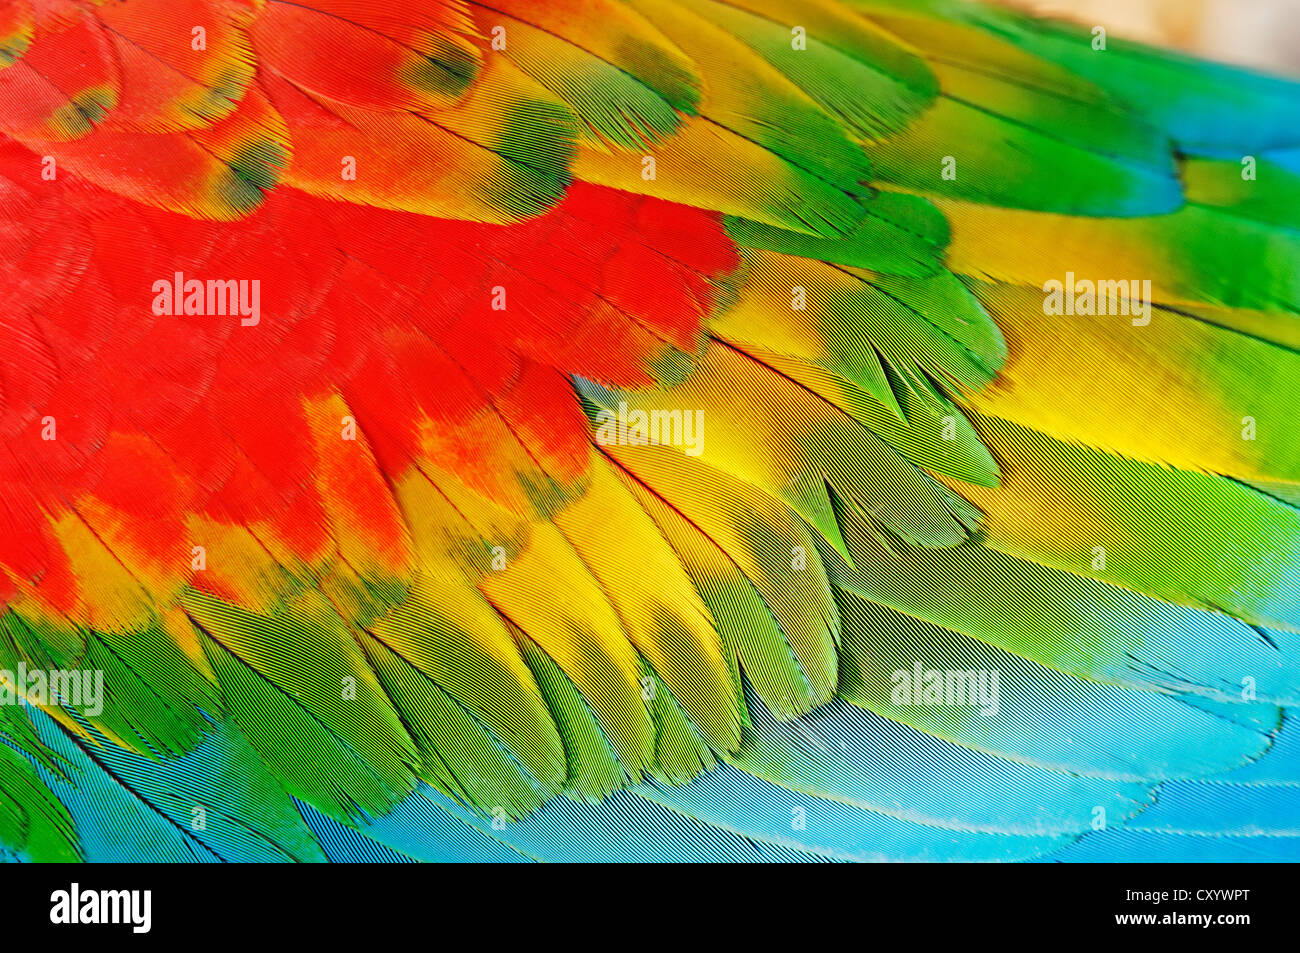 Hybrid of scarlet macaw and red-and-green macaw (Ara macao x Ara chloroptera), detailed view of the feathers Stock Photo